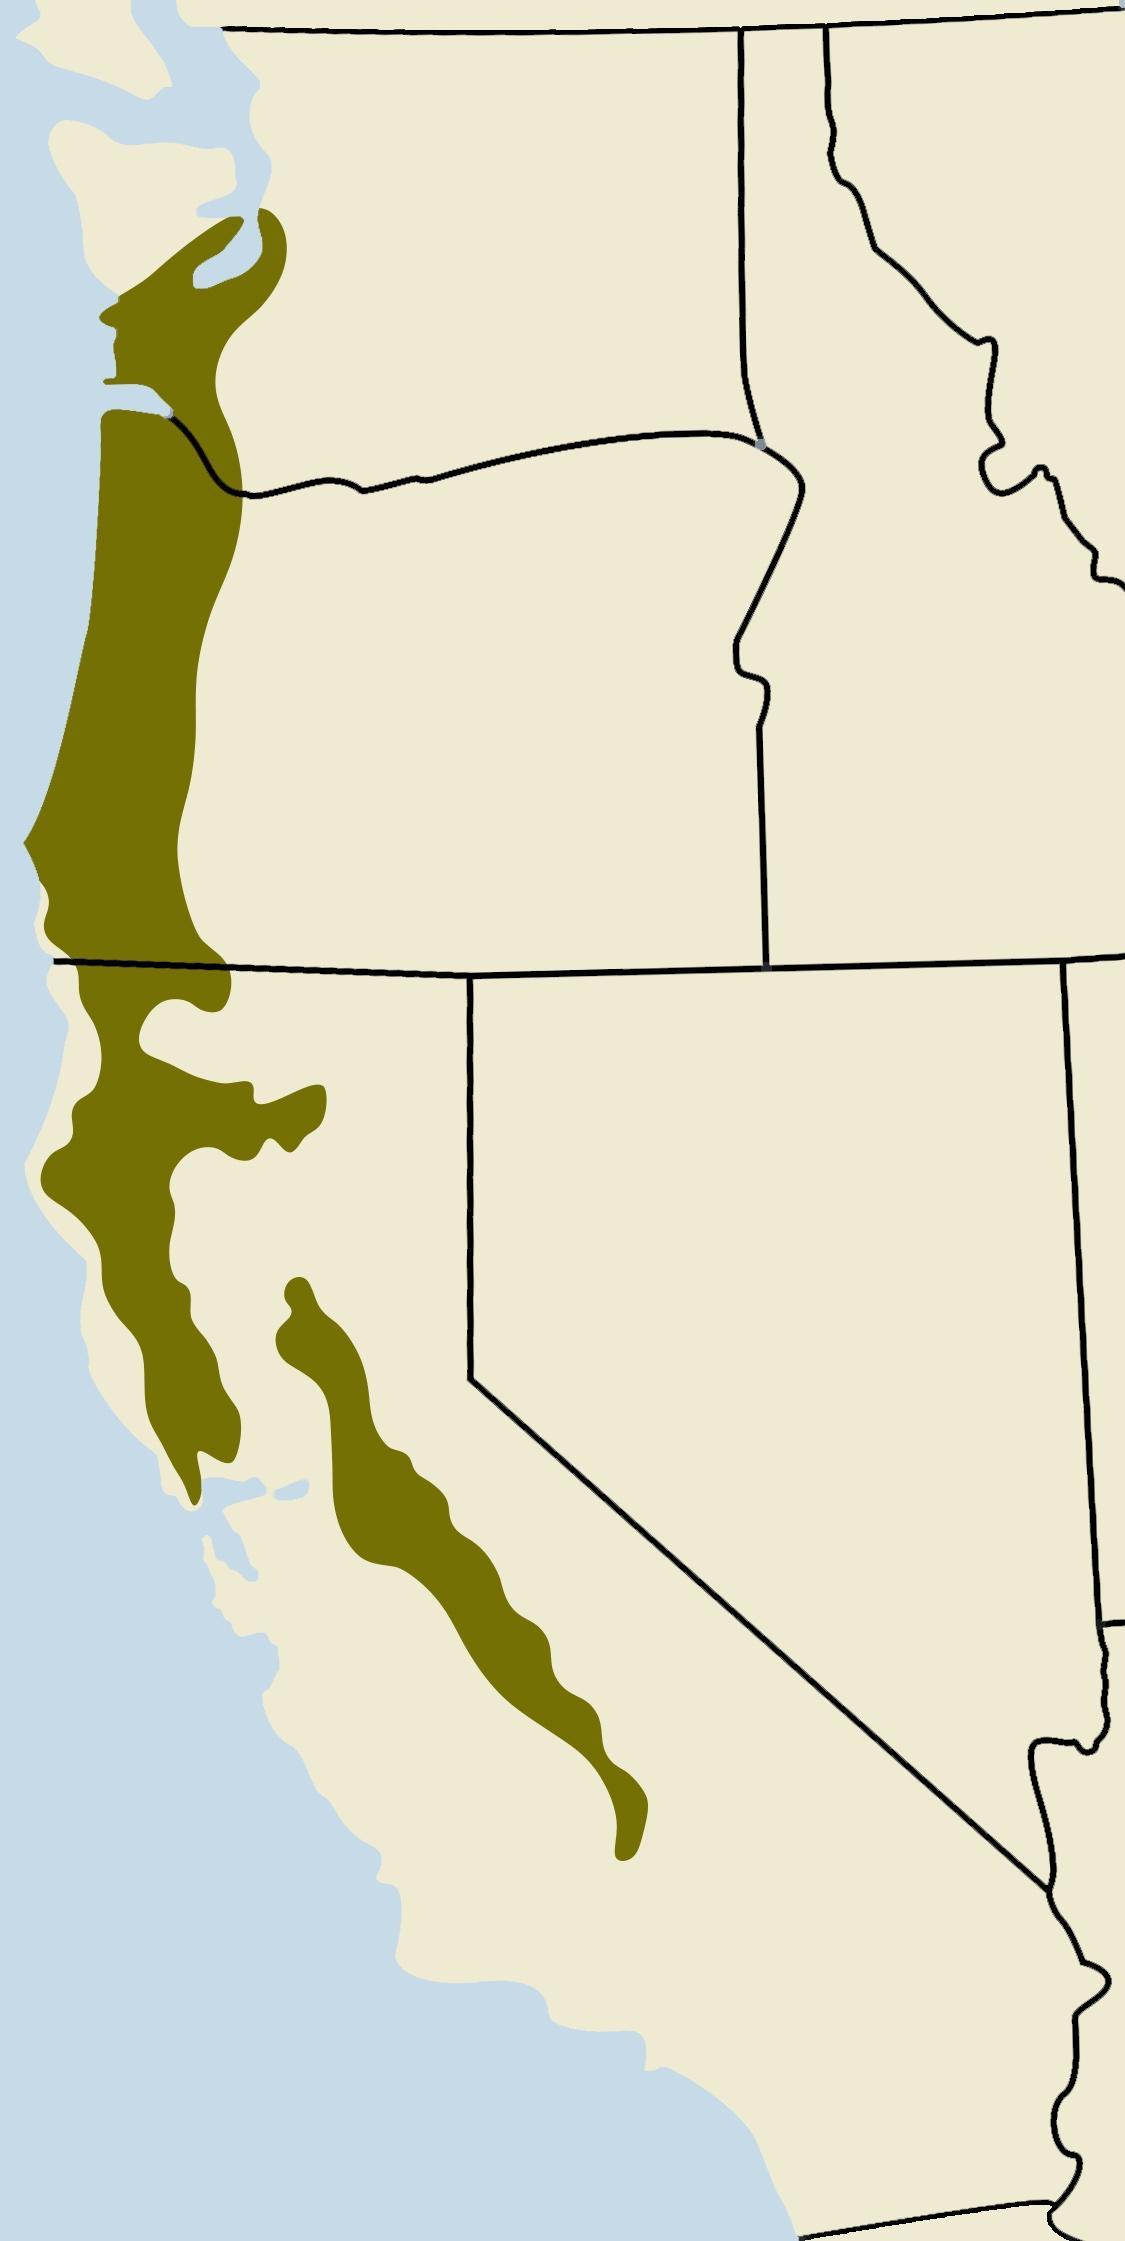 range of Oregon ash extends from puget sound and coastal Washington, through western Oregon and the mountains of northern and central California